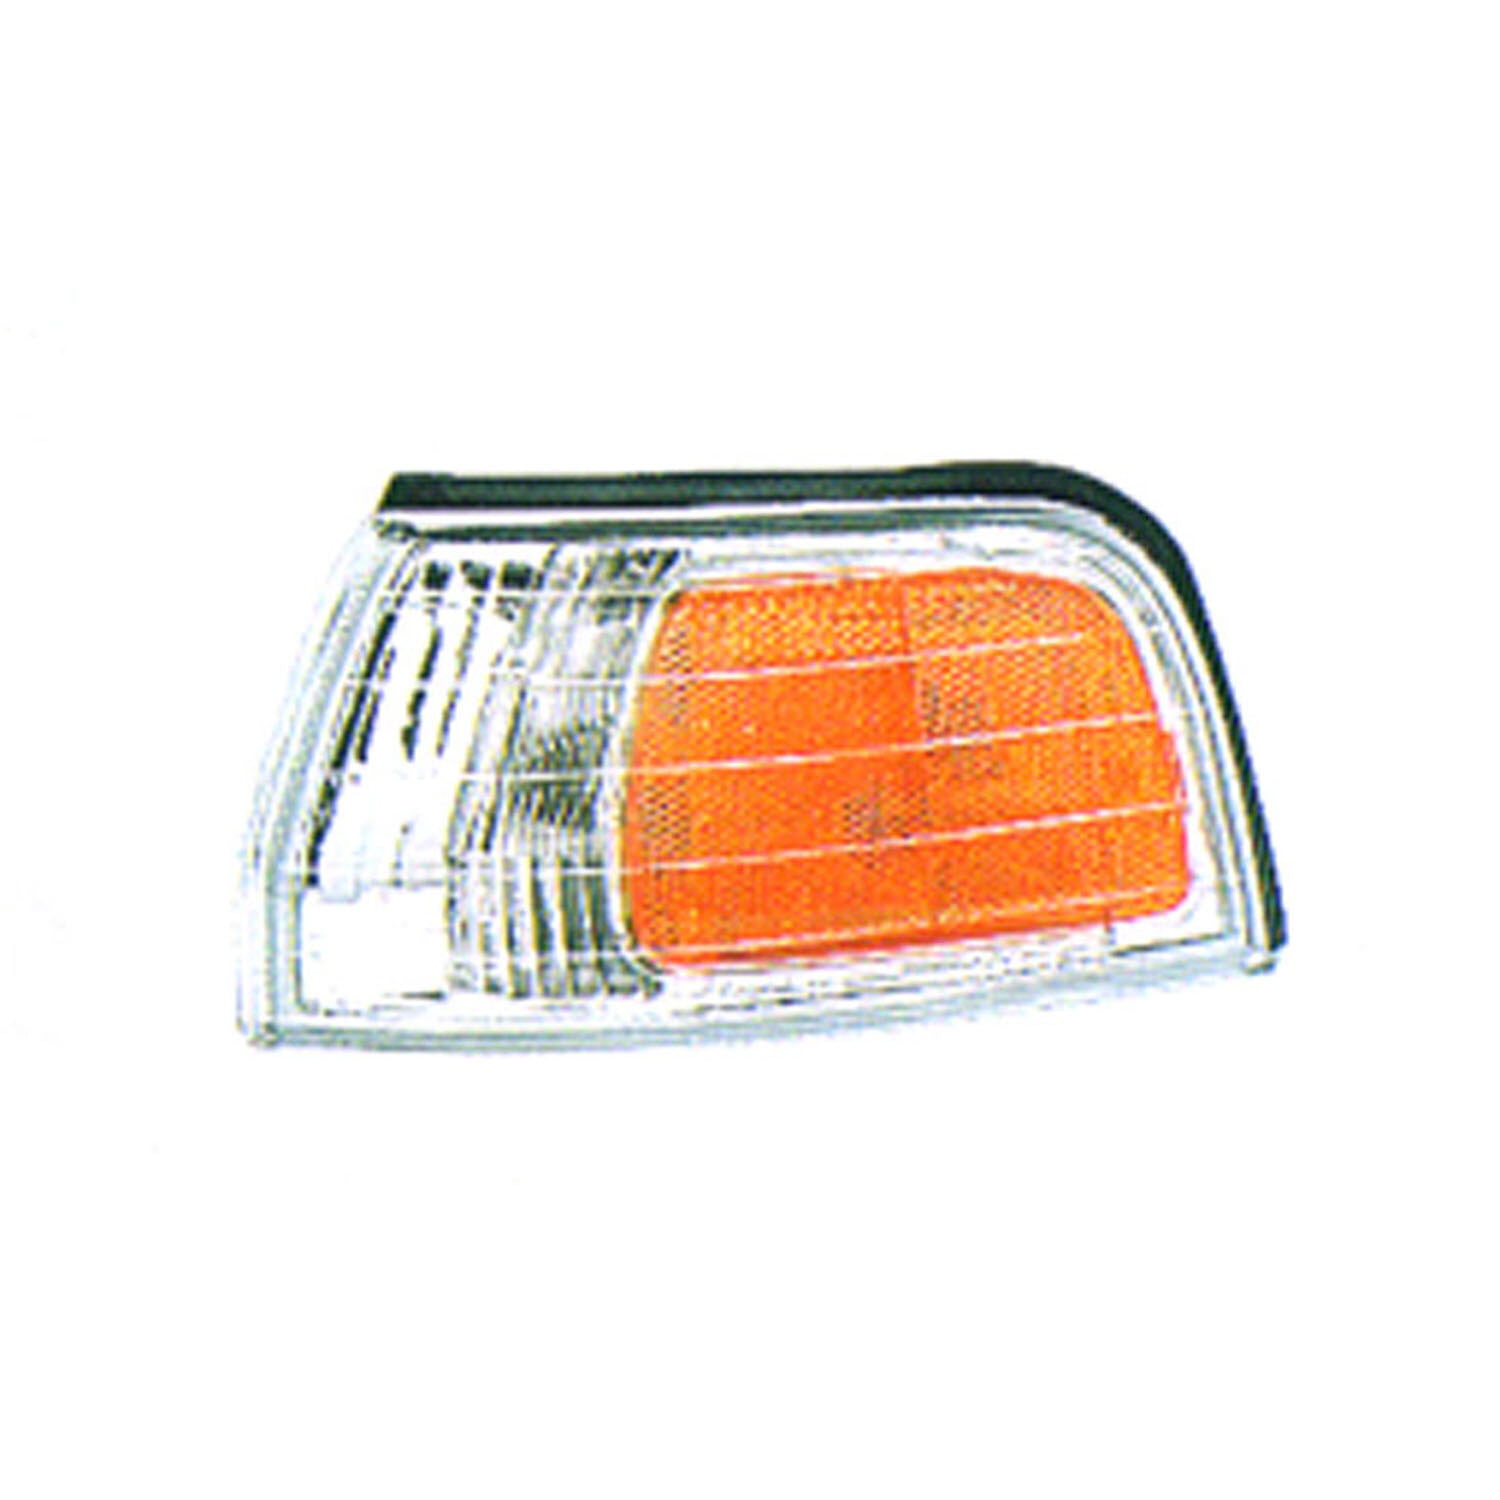 New Drivers Park Signal Side Marker Light Lamp Assembly for 92-93 Honda Accord